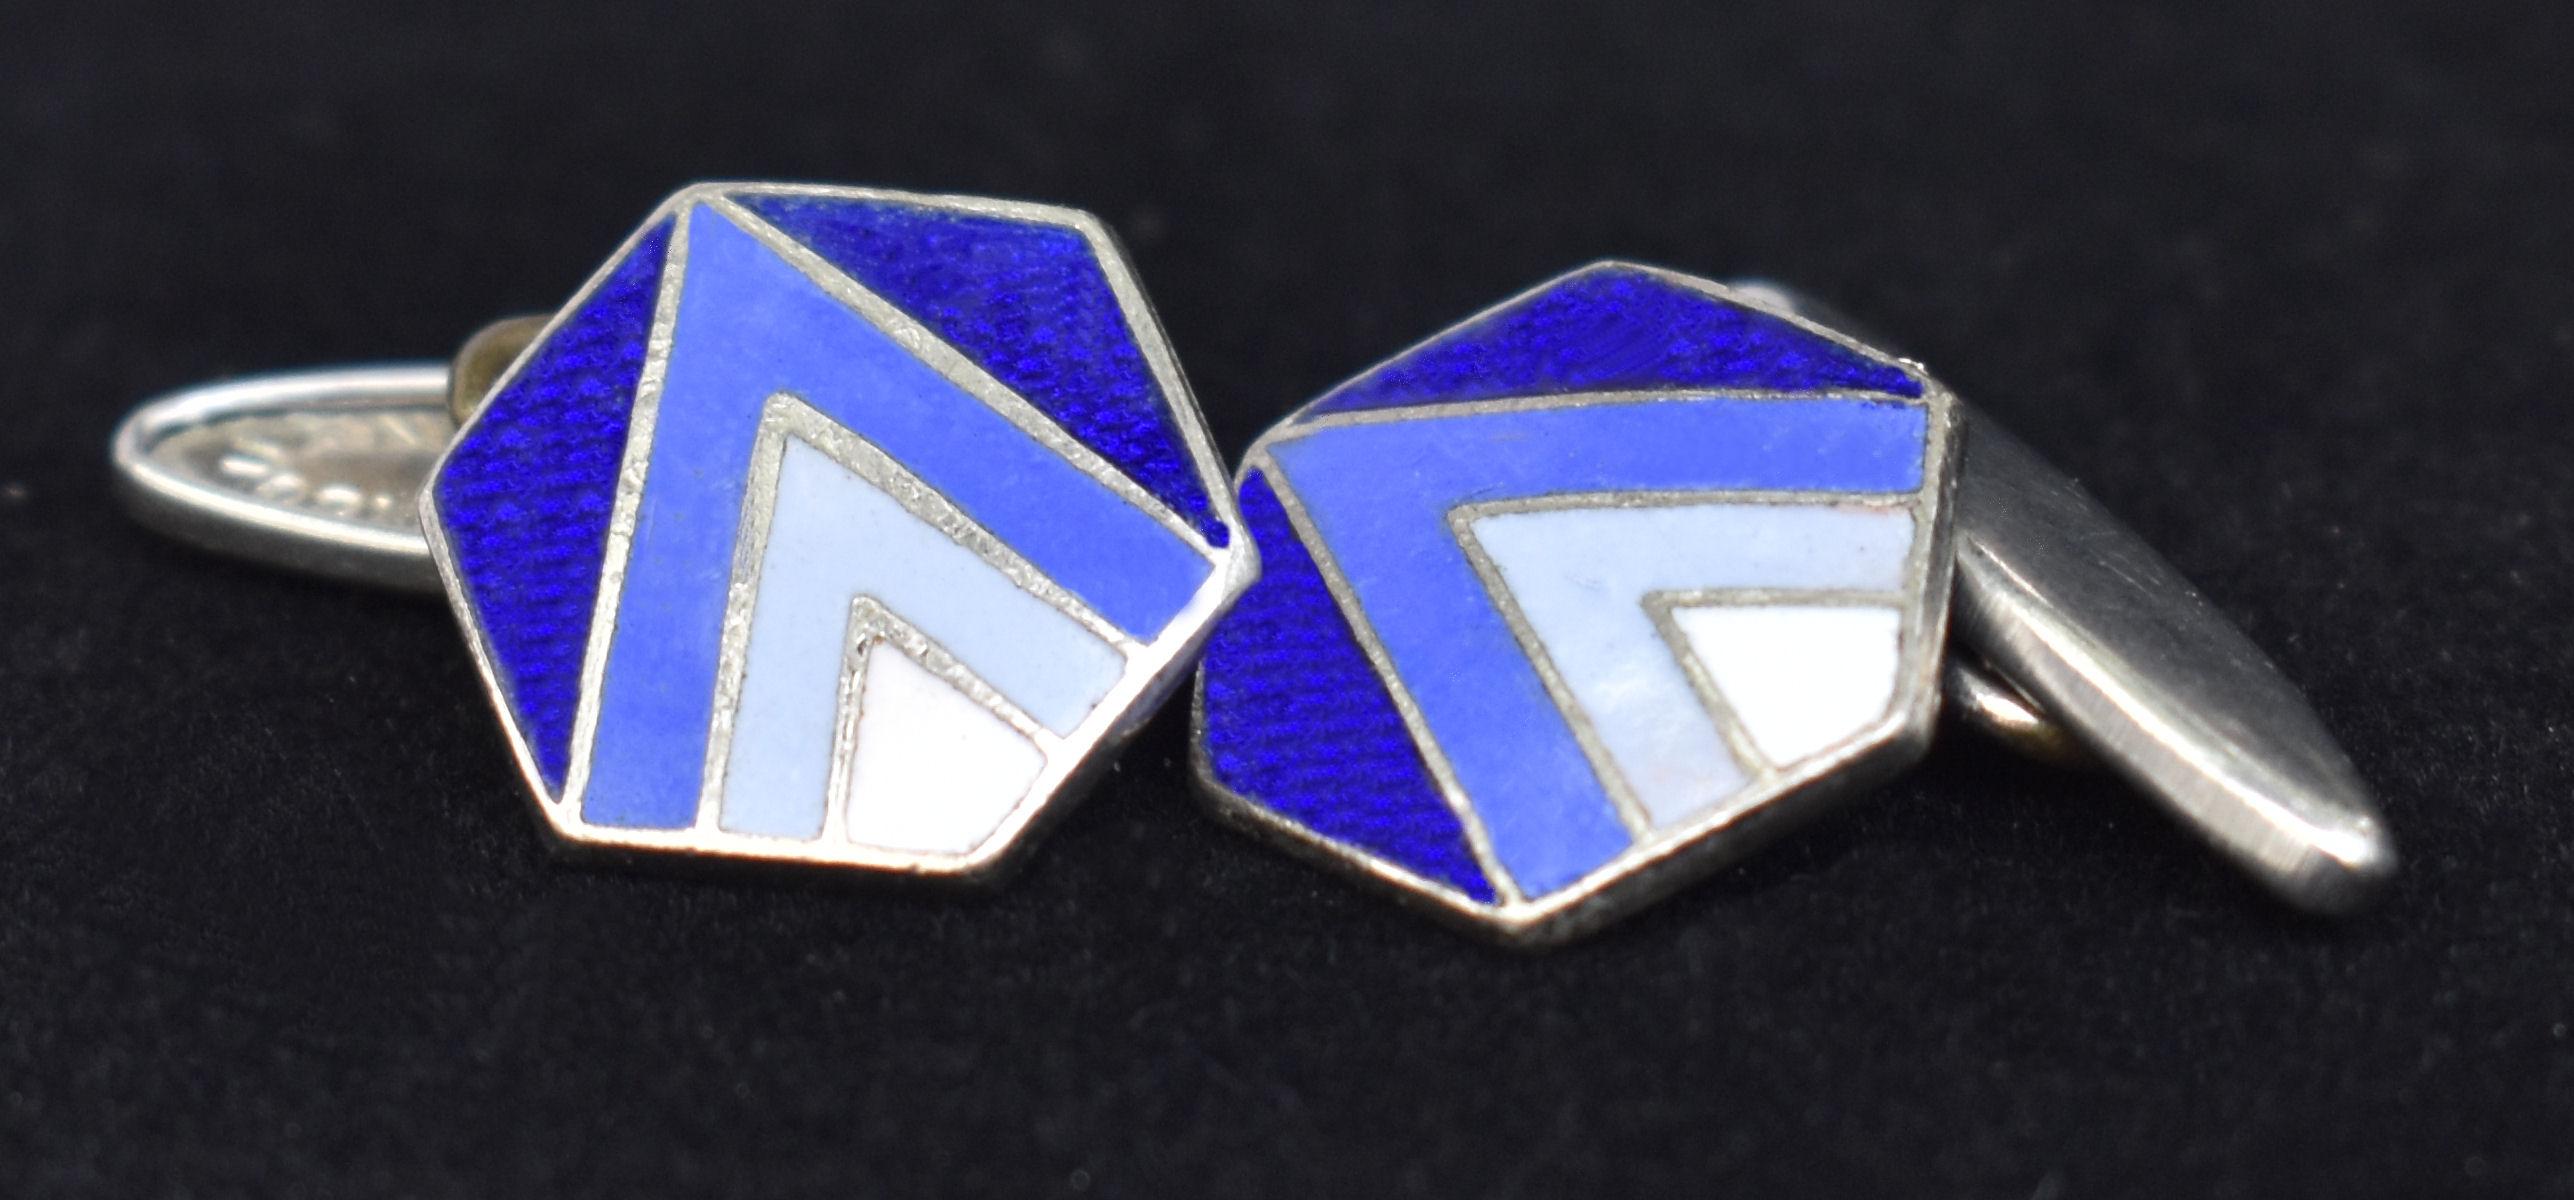 Art Deco Modernist Matching Pair of Enamel & Guilloch Gents Cufflinks, c 1930 In Good Condition For Sale In Westward ho, GB